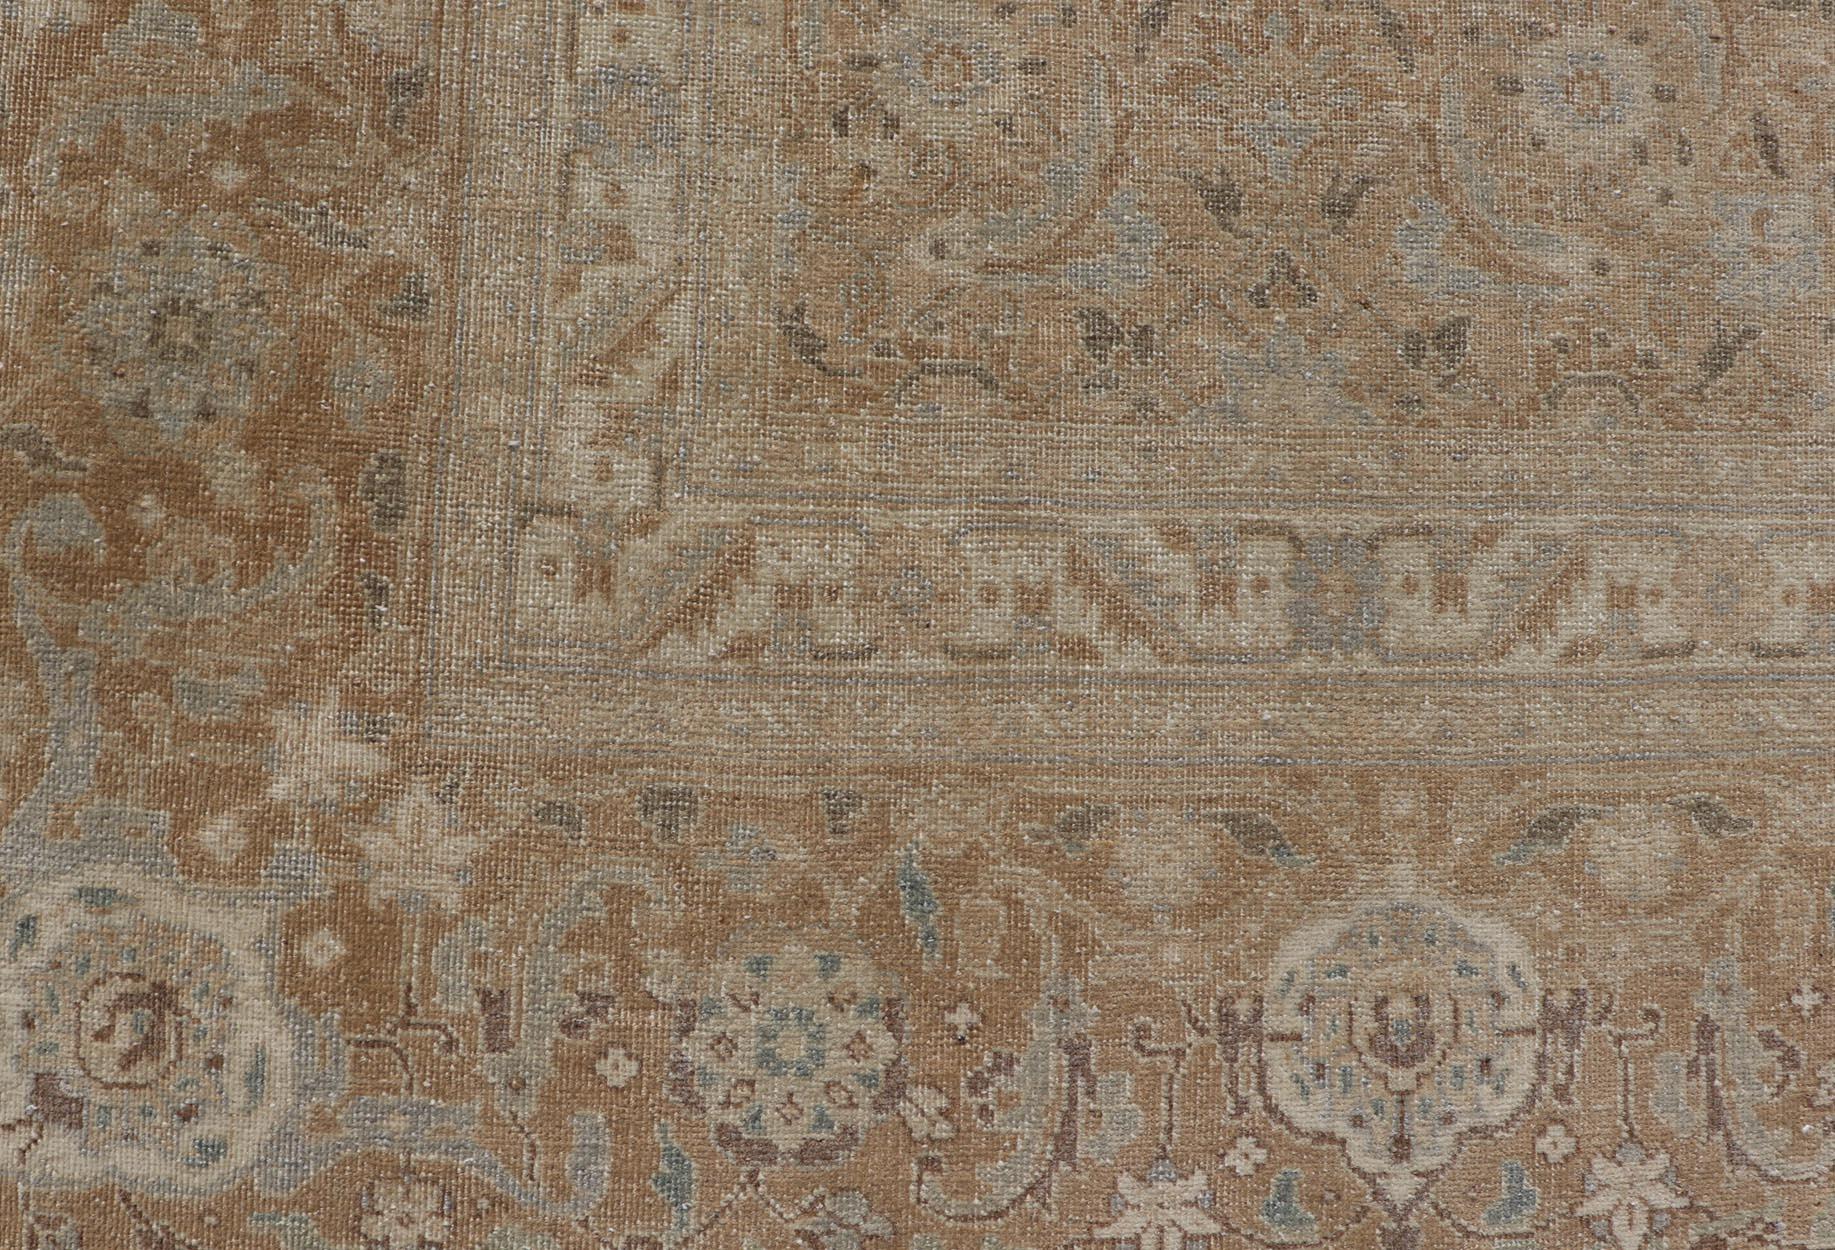 20th Century Antique Persian Tabriz Rug in Wool with All-Over Floral Design in Earth Colors For Sale